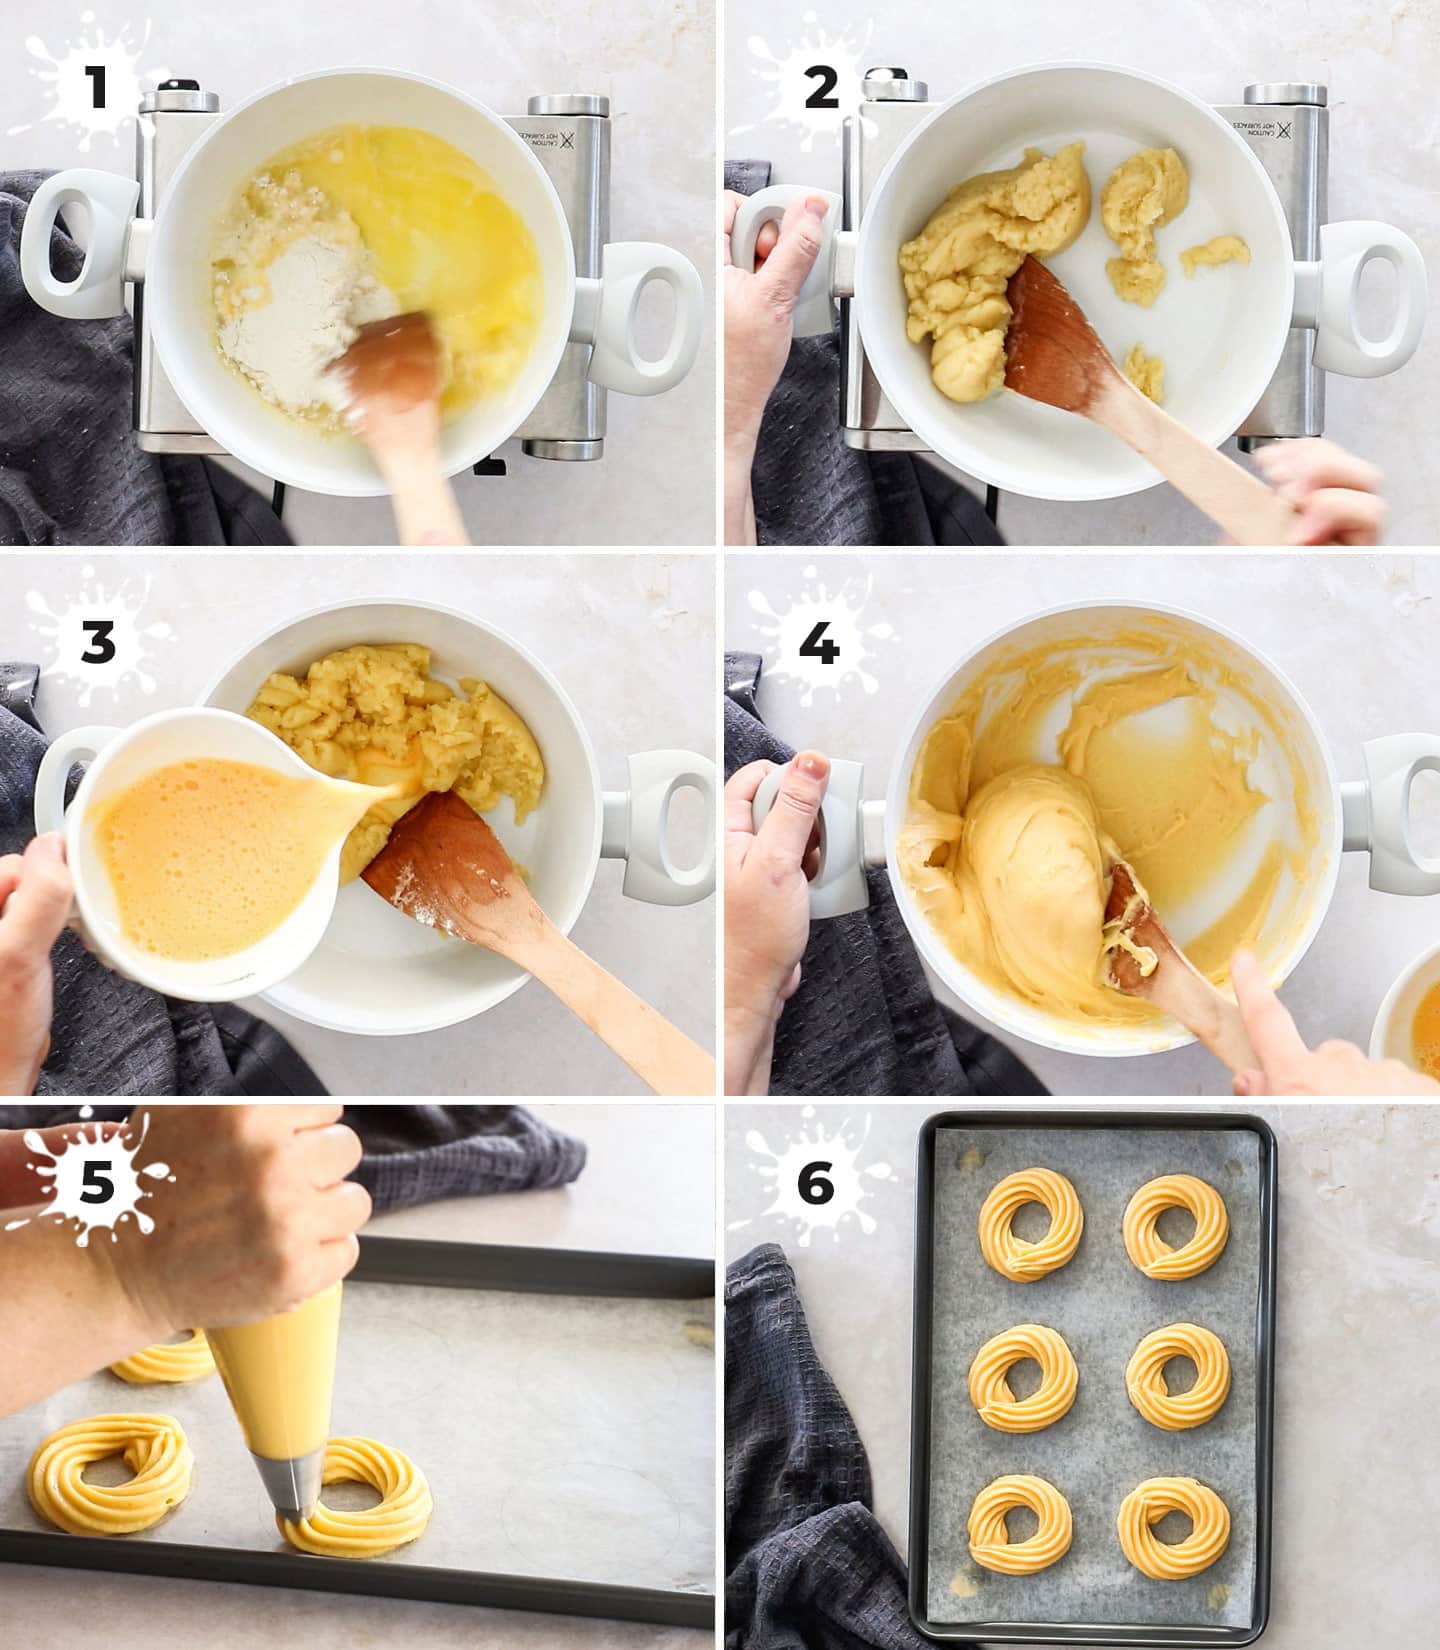 A collage of 6 images showing how to make choux pastry.